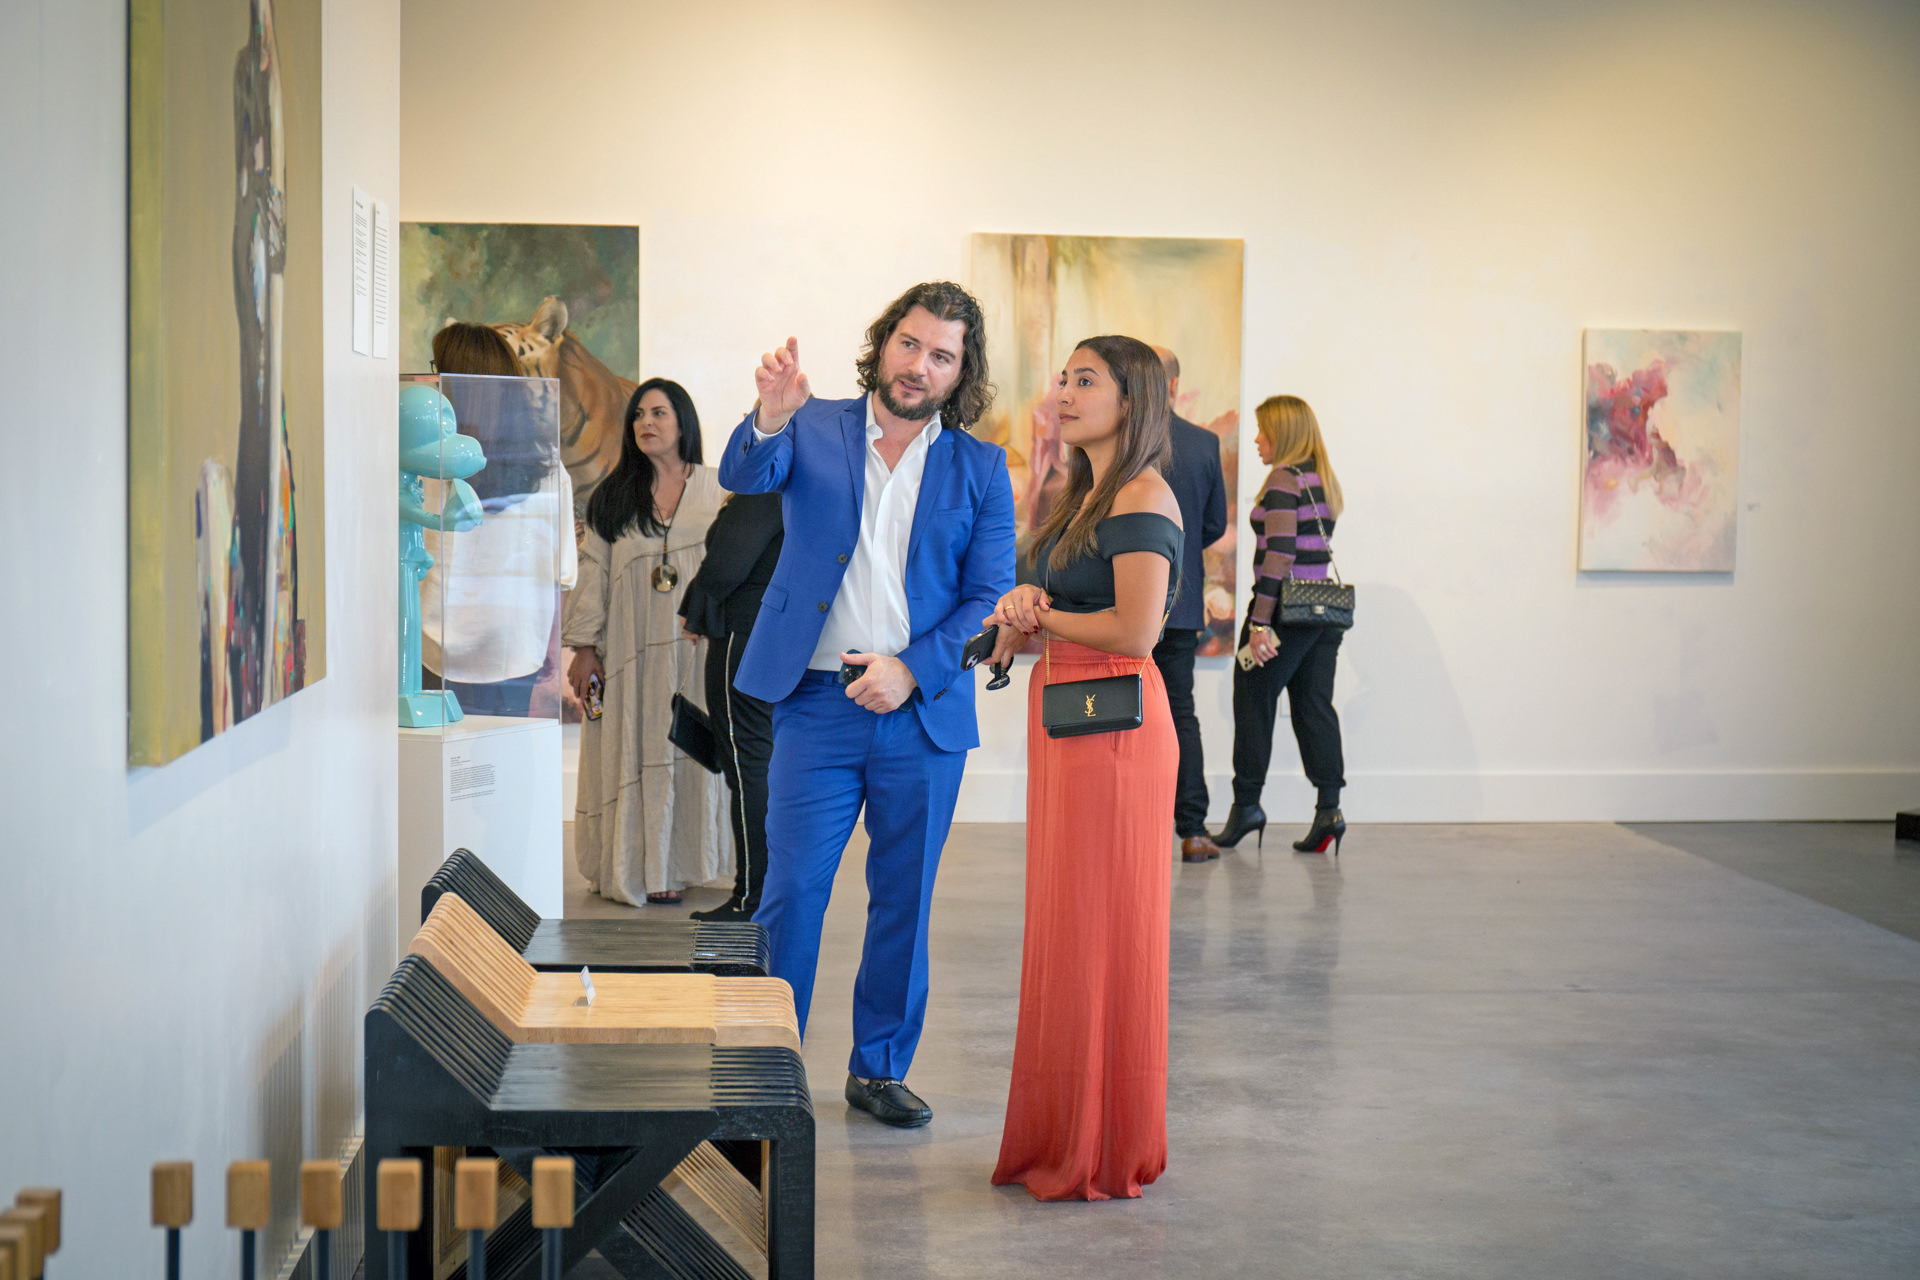 Artist Alex Righetto showing a painting titled 'Mona Lisa's Daughter' to an art collector in a gallery setting